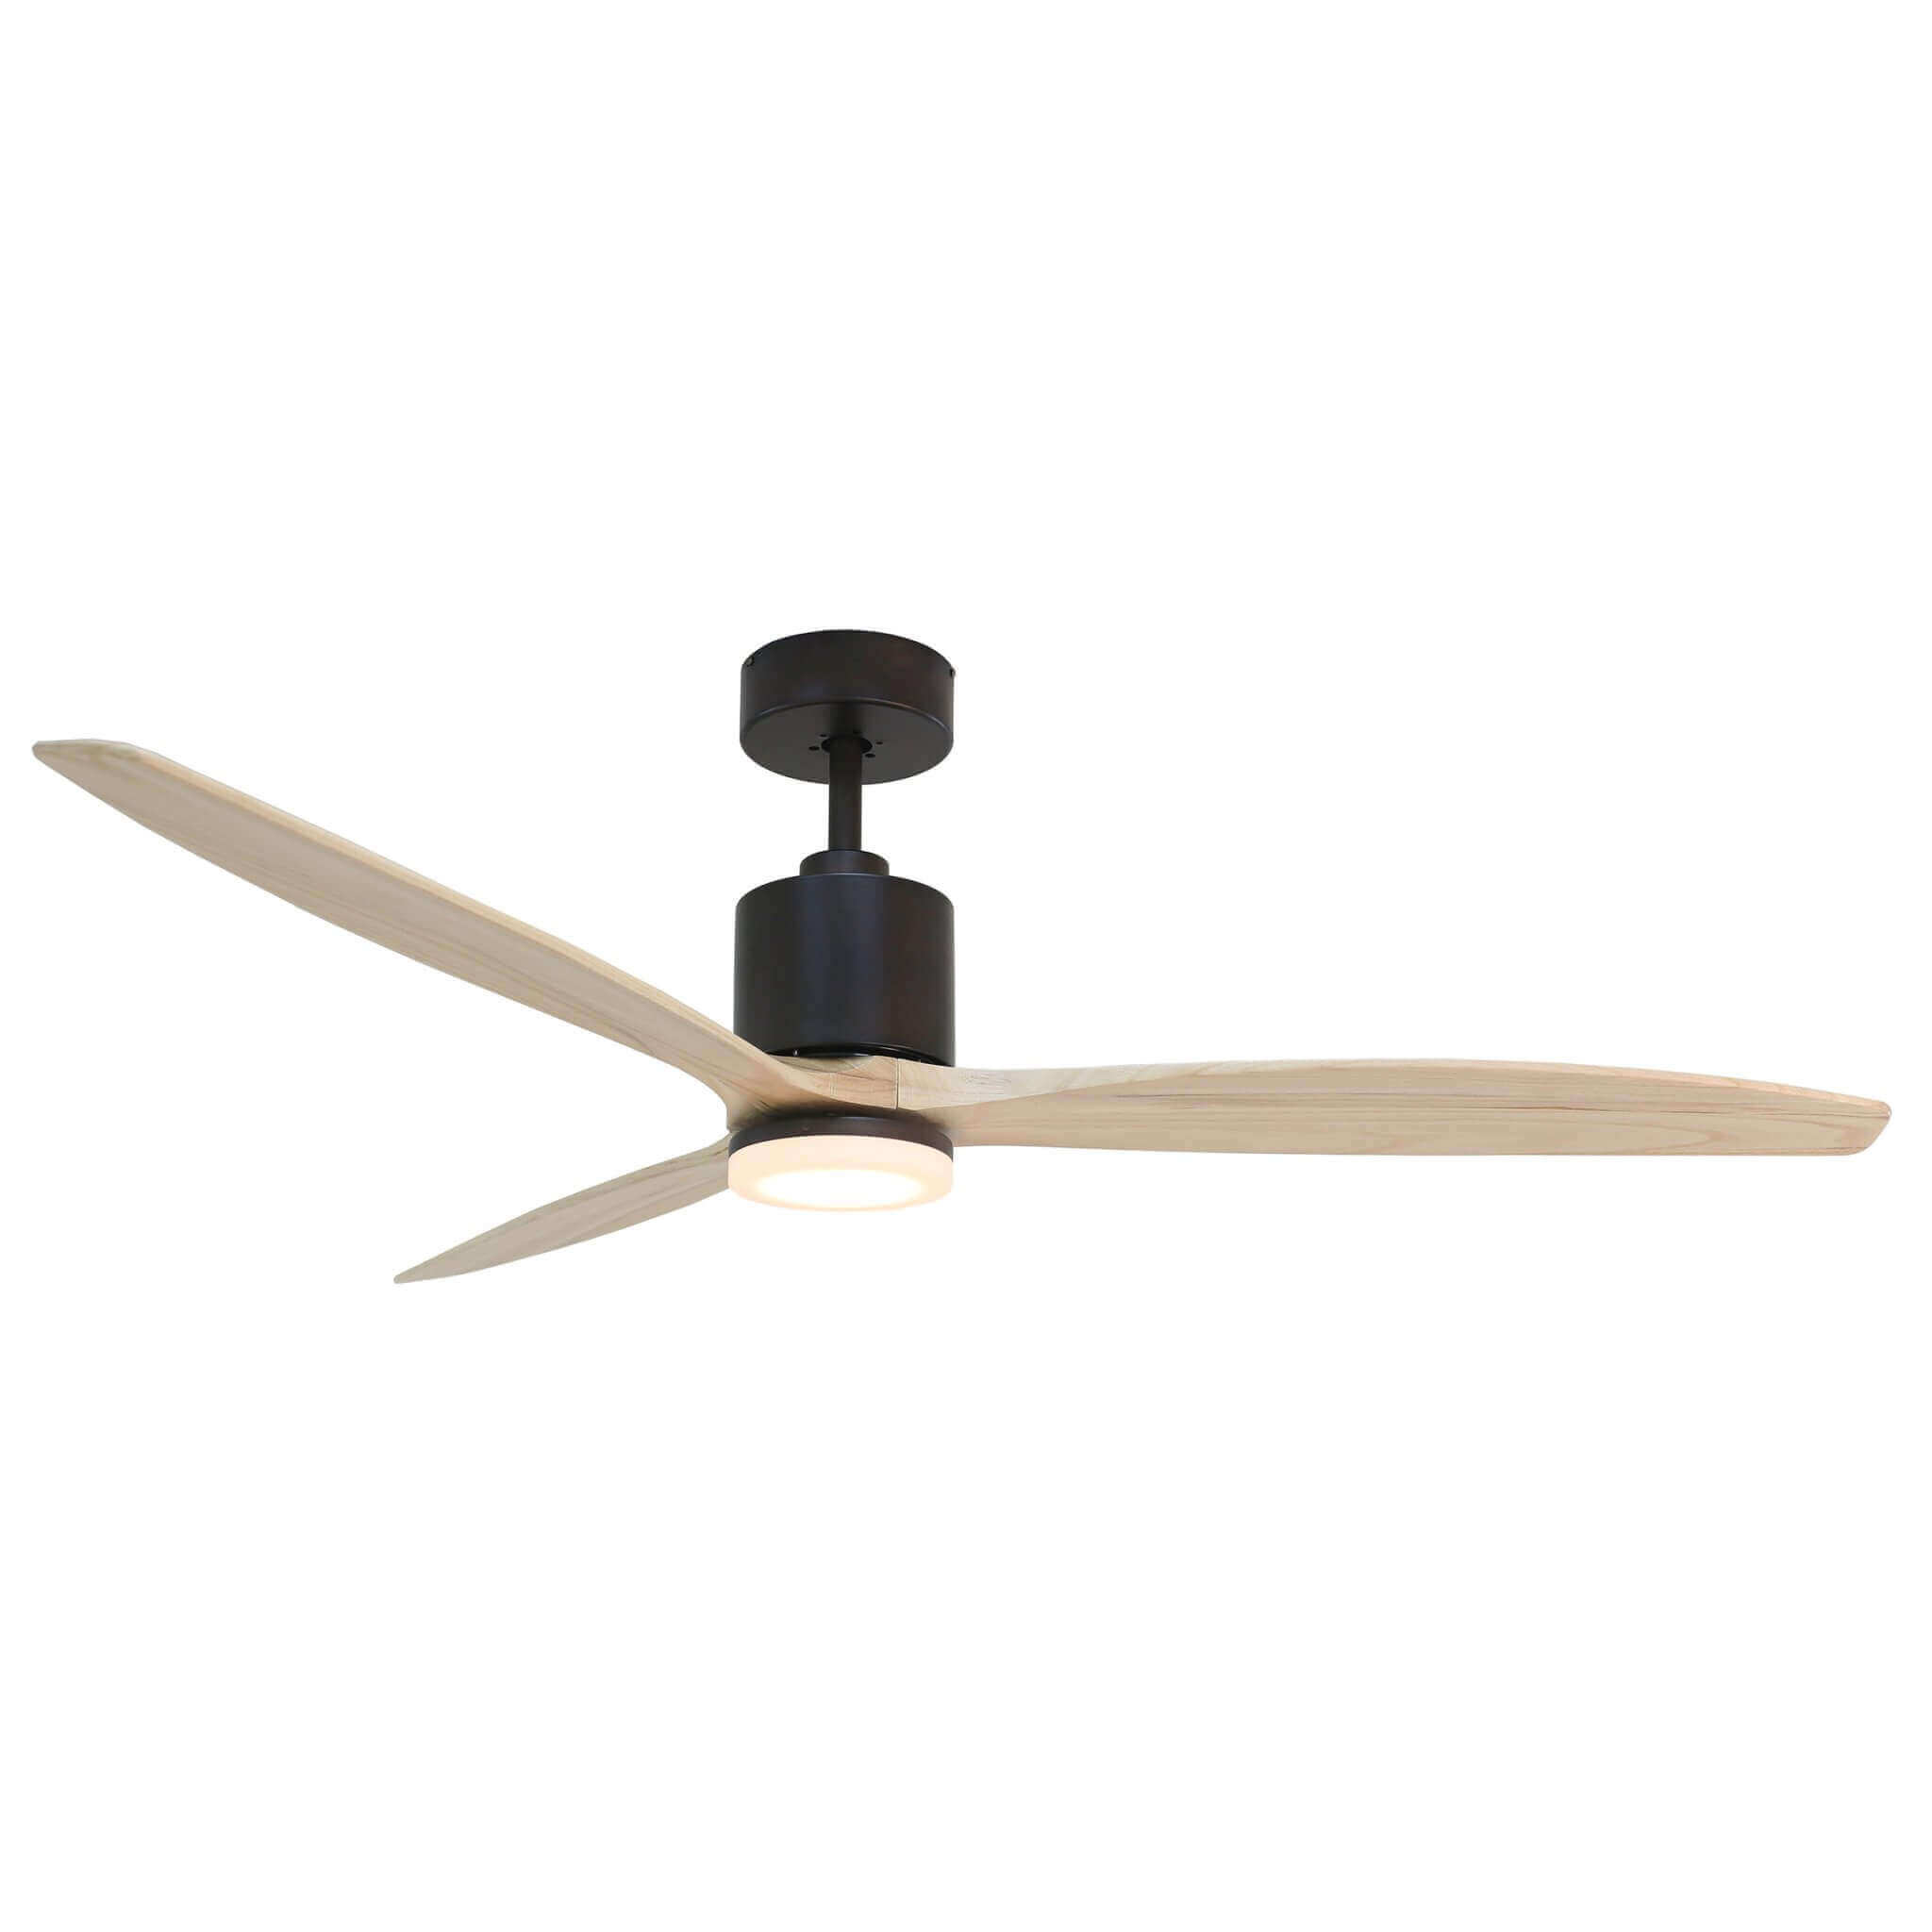 Forno Voce – Tripolo 72” Oil Rubbed Bronze Body & Light Ash Wood Blade Voice Activated Smart Ceiling Fan